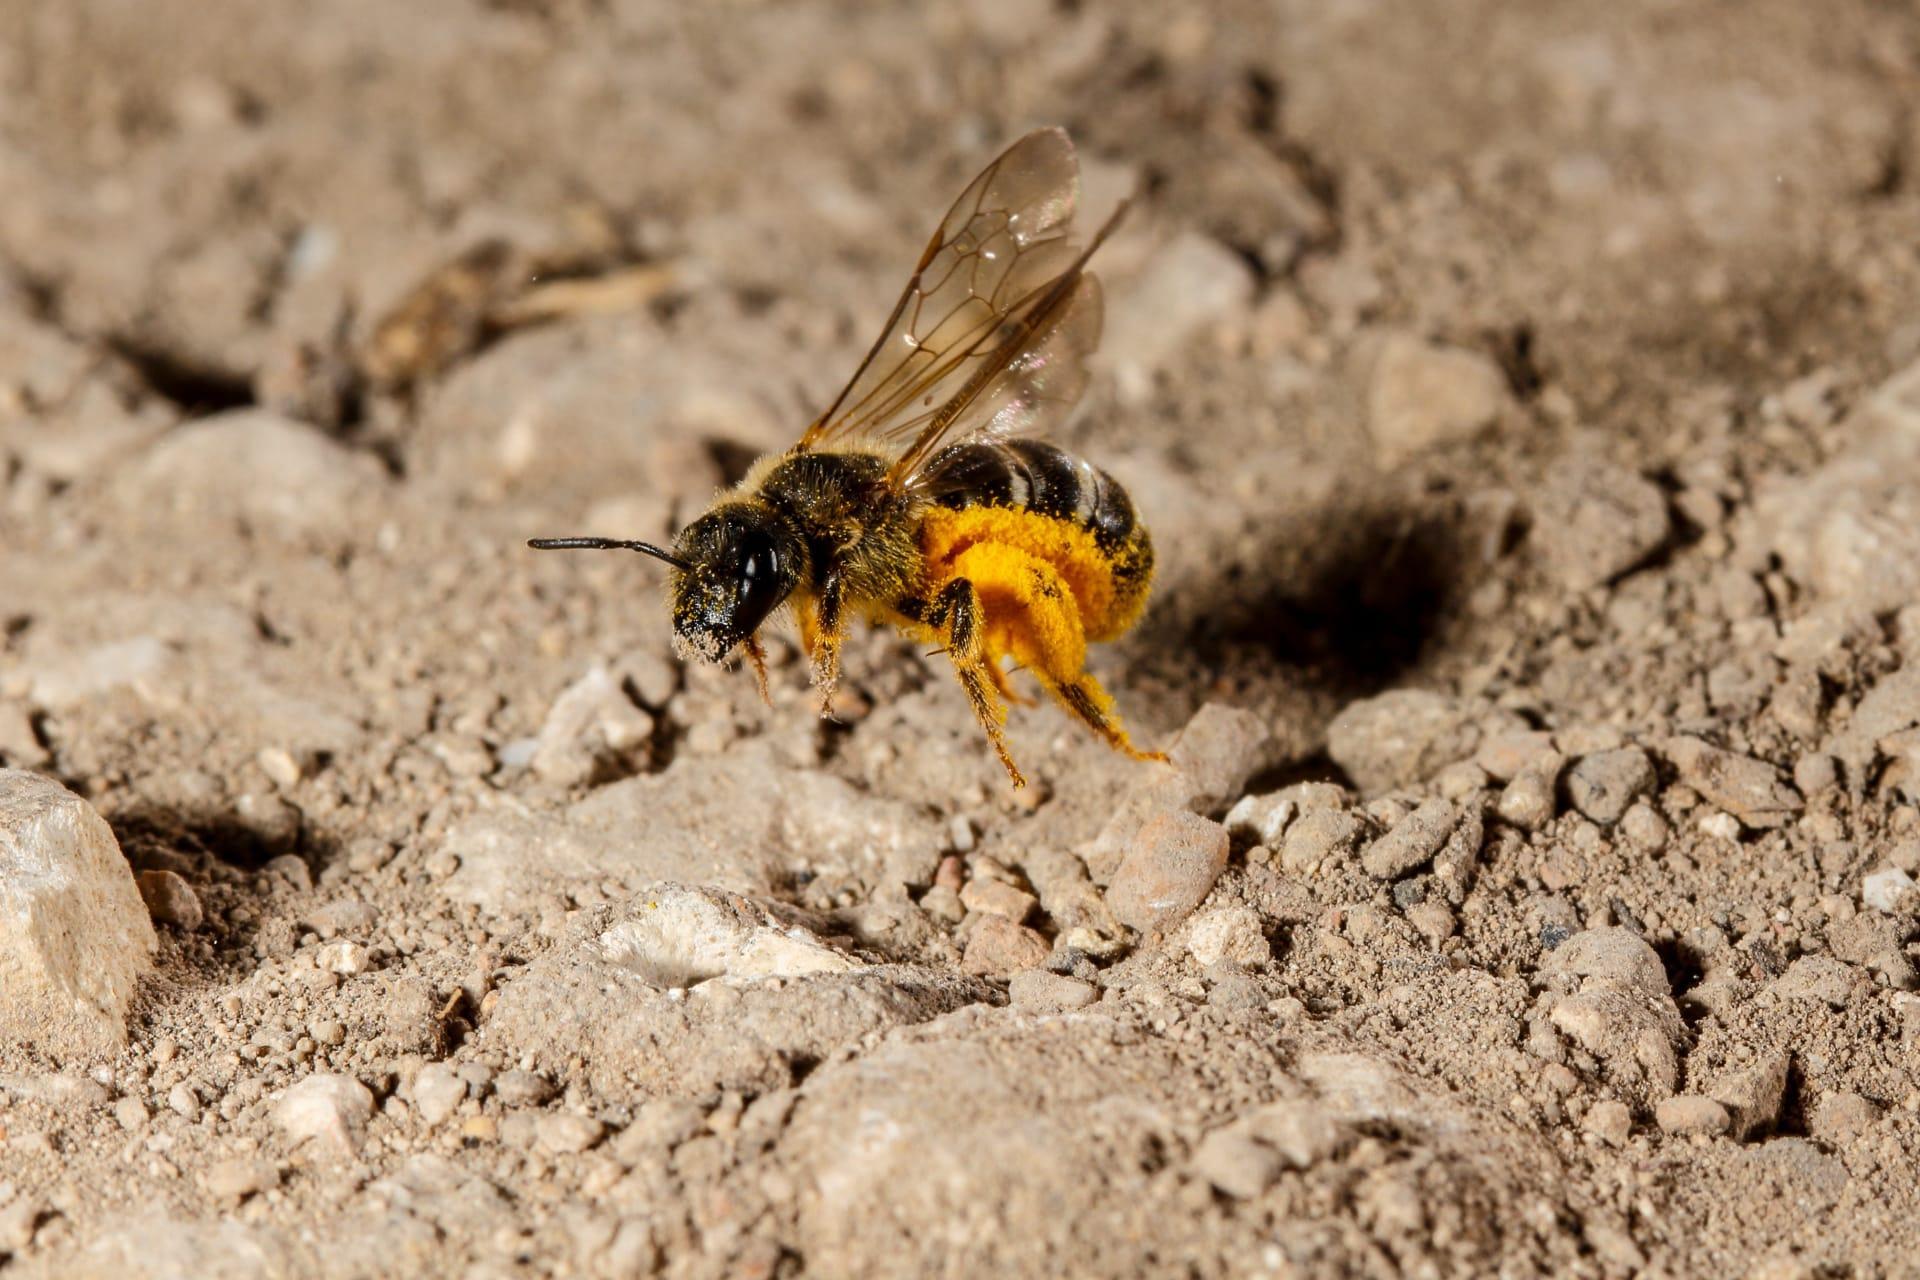 Ground bees pictures